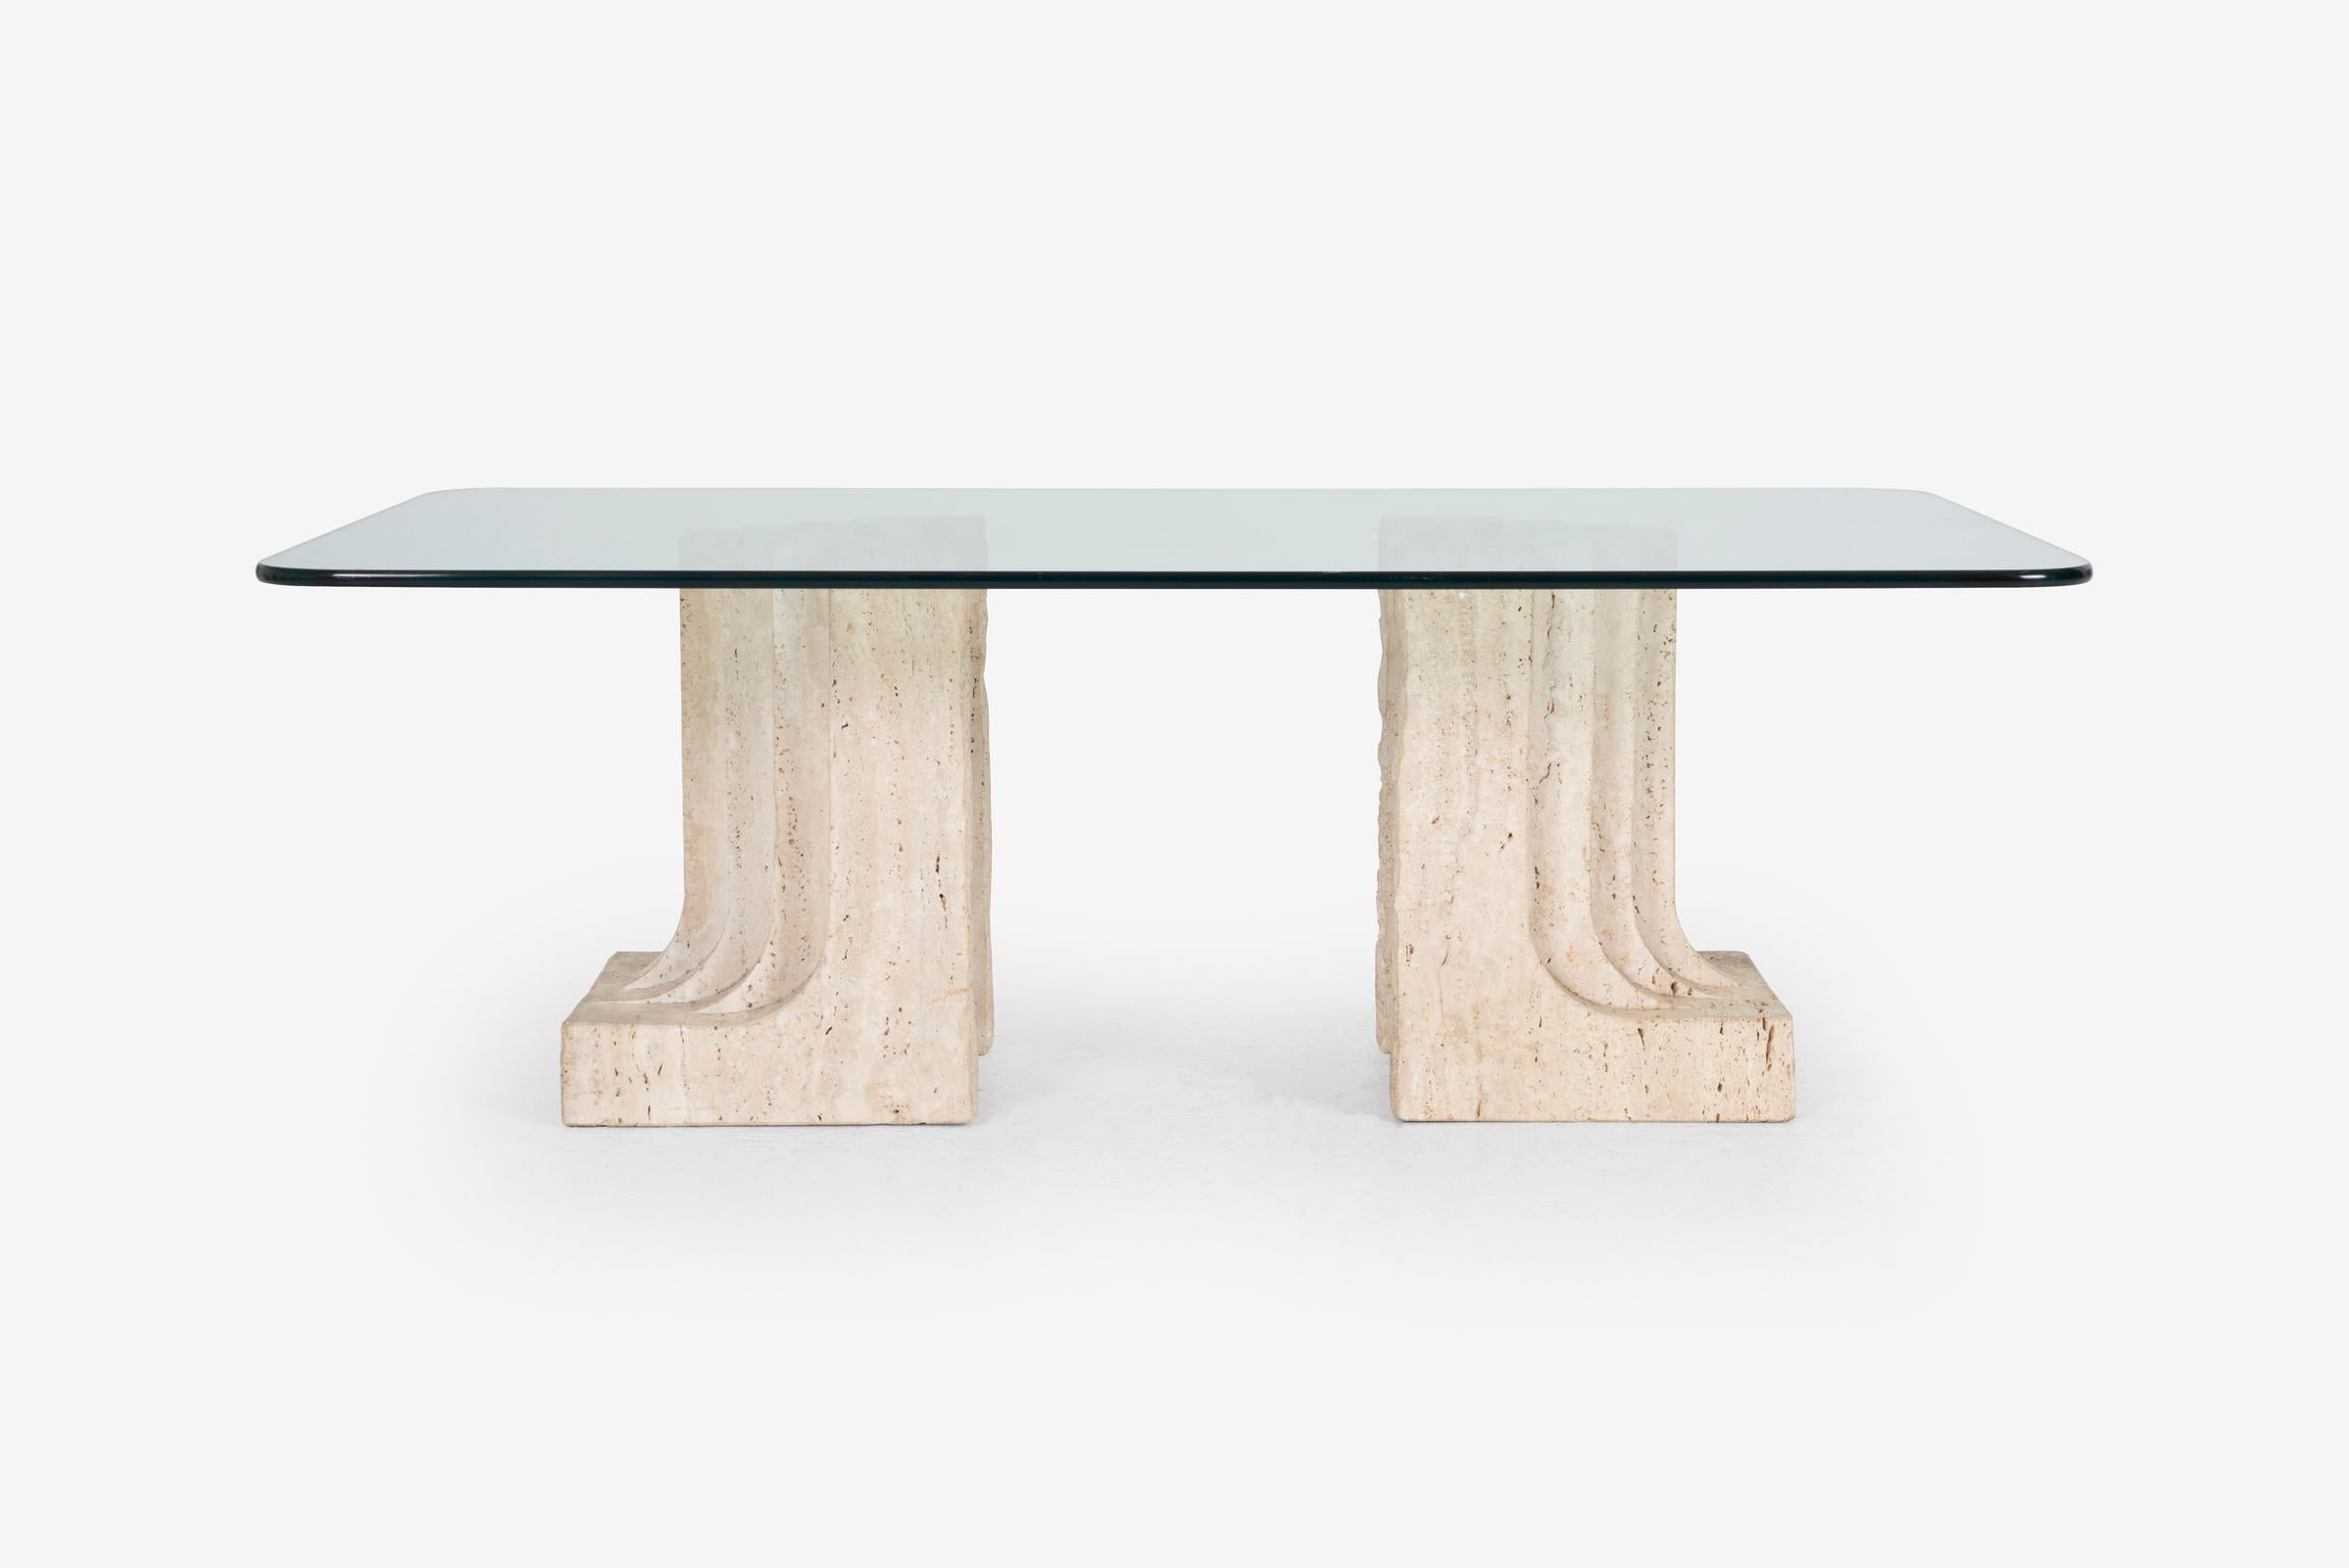 The coffee table is anchored by two robust, sculptural blocks of travertine. Exhibiting raw textures and subtle tonal nuances, the travertine blocks are reminiscent of the iconic Brutalist aesthetic, while their undulating forms evoke an organic